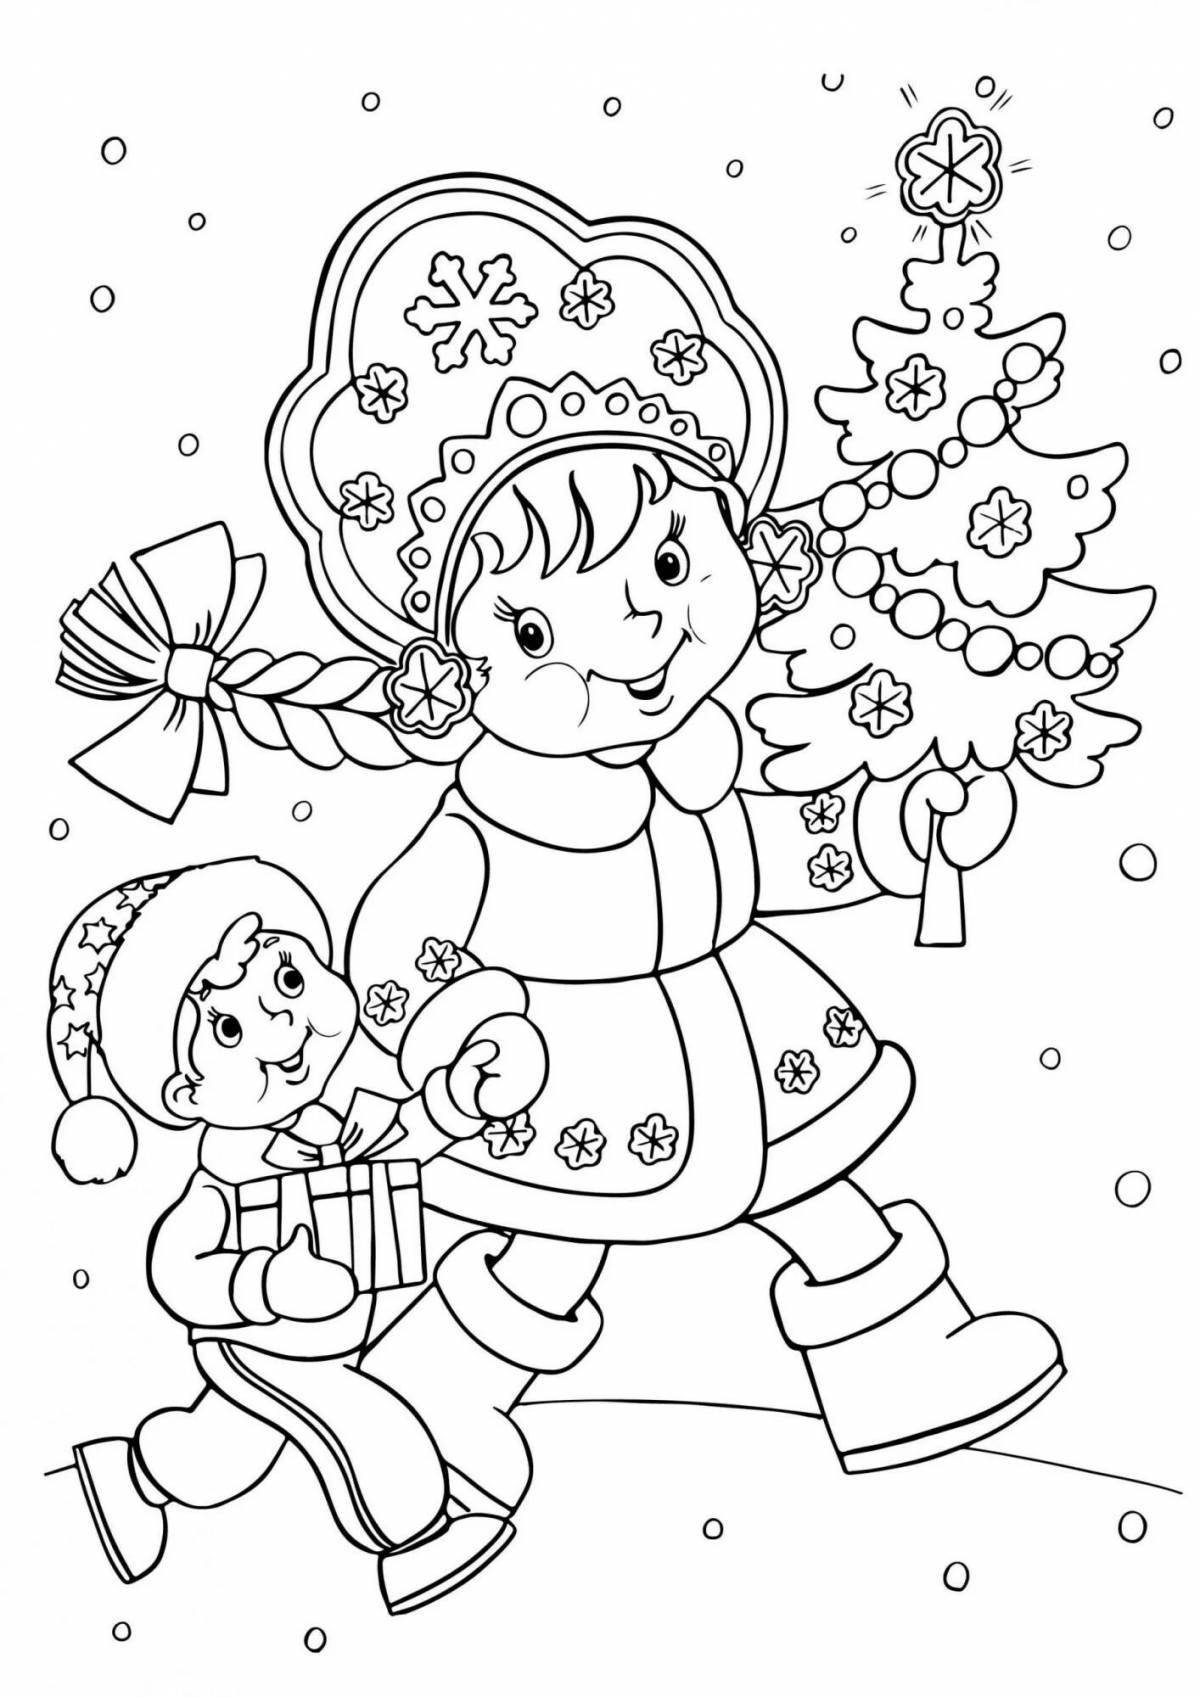 Color-obsessed Christmas coloring book for 8-9 year olds